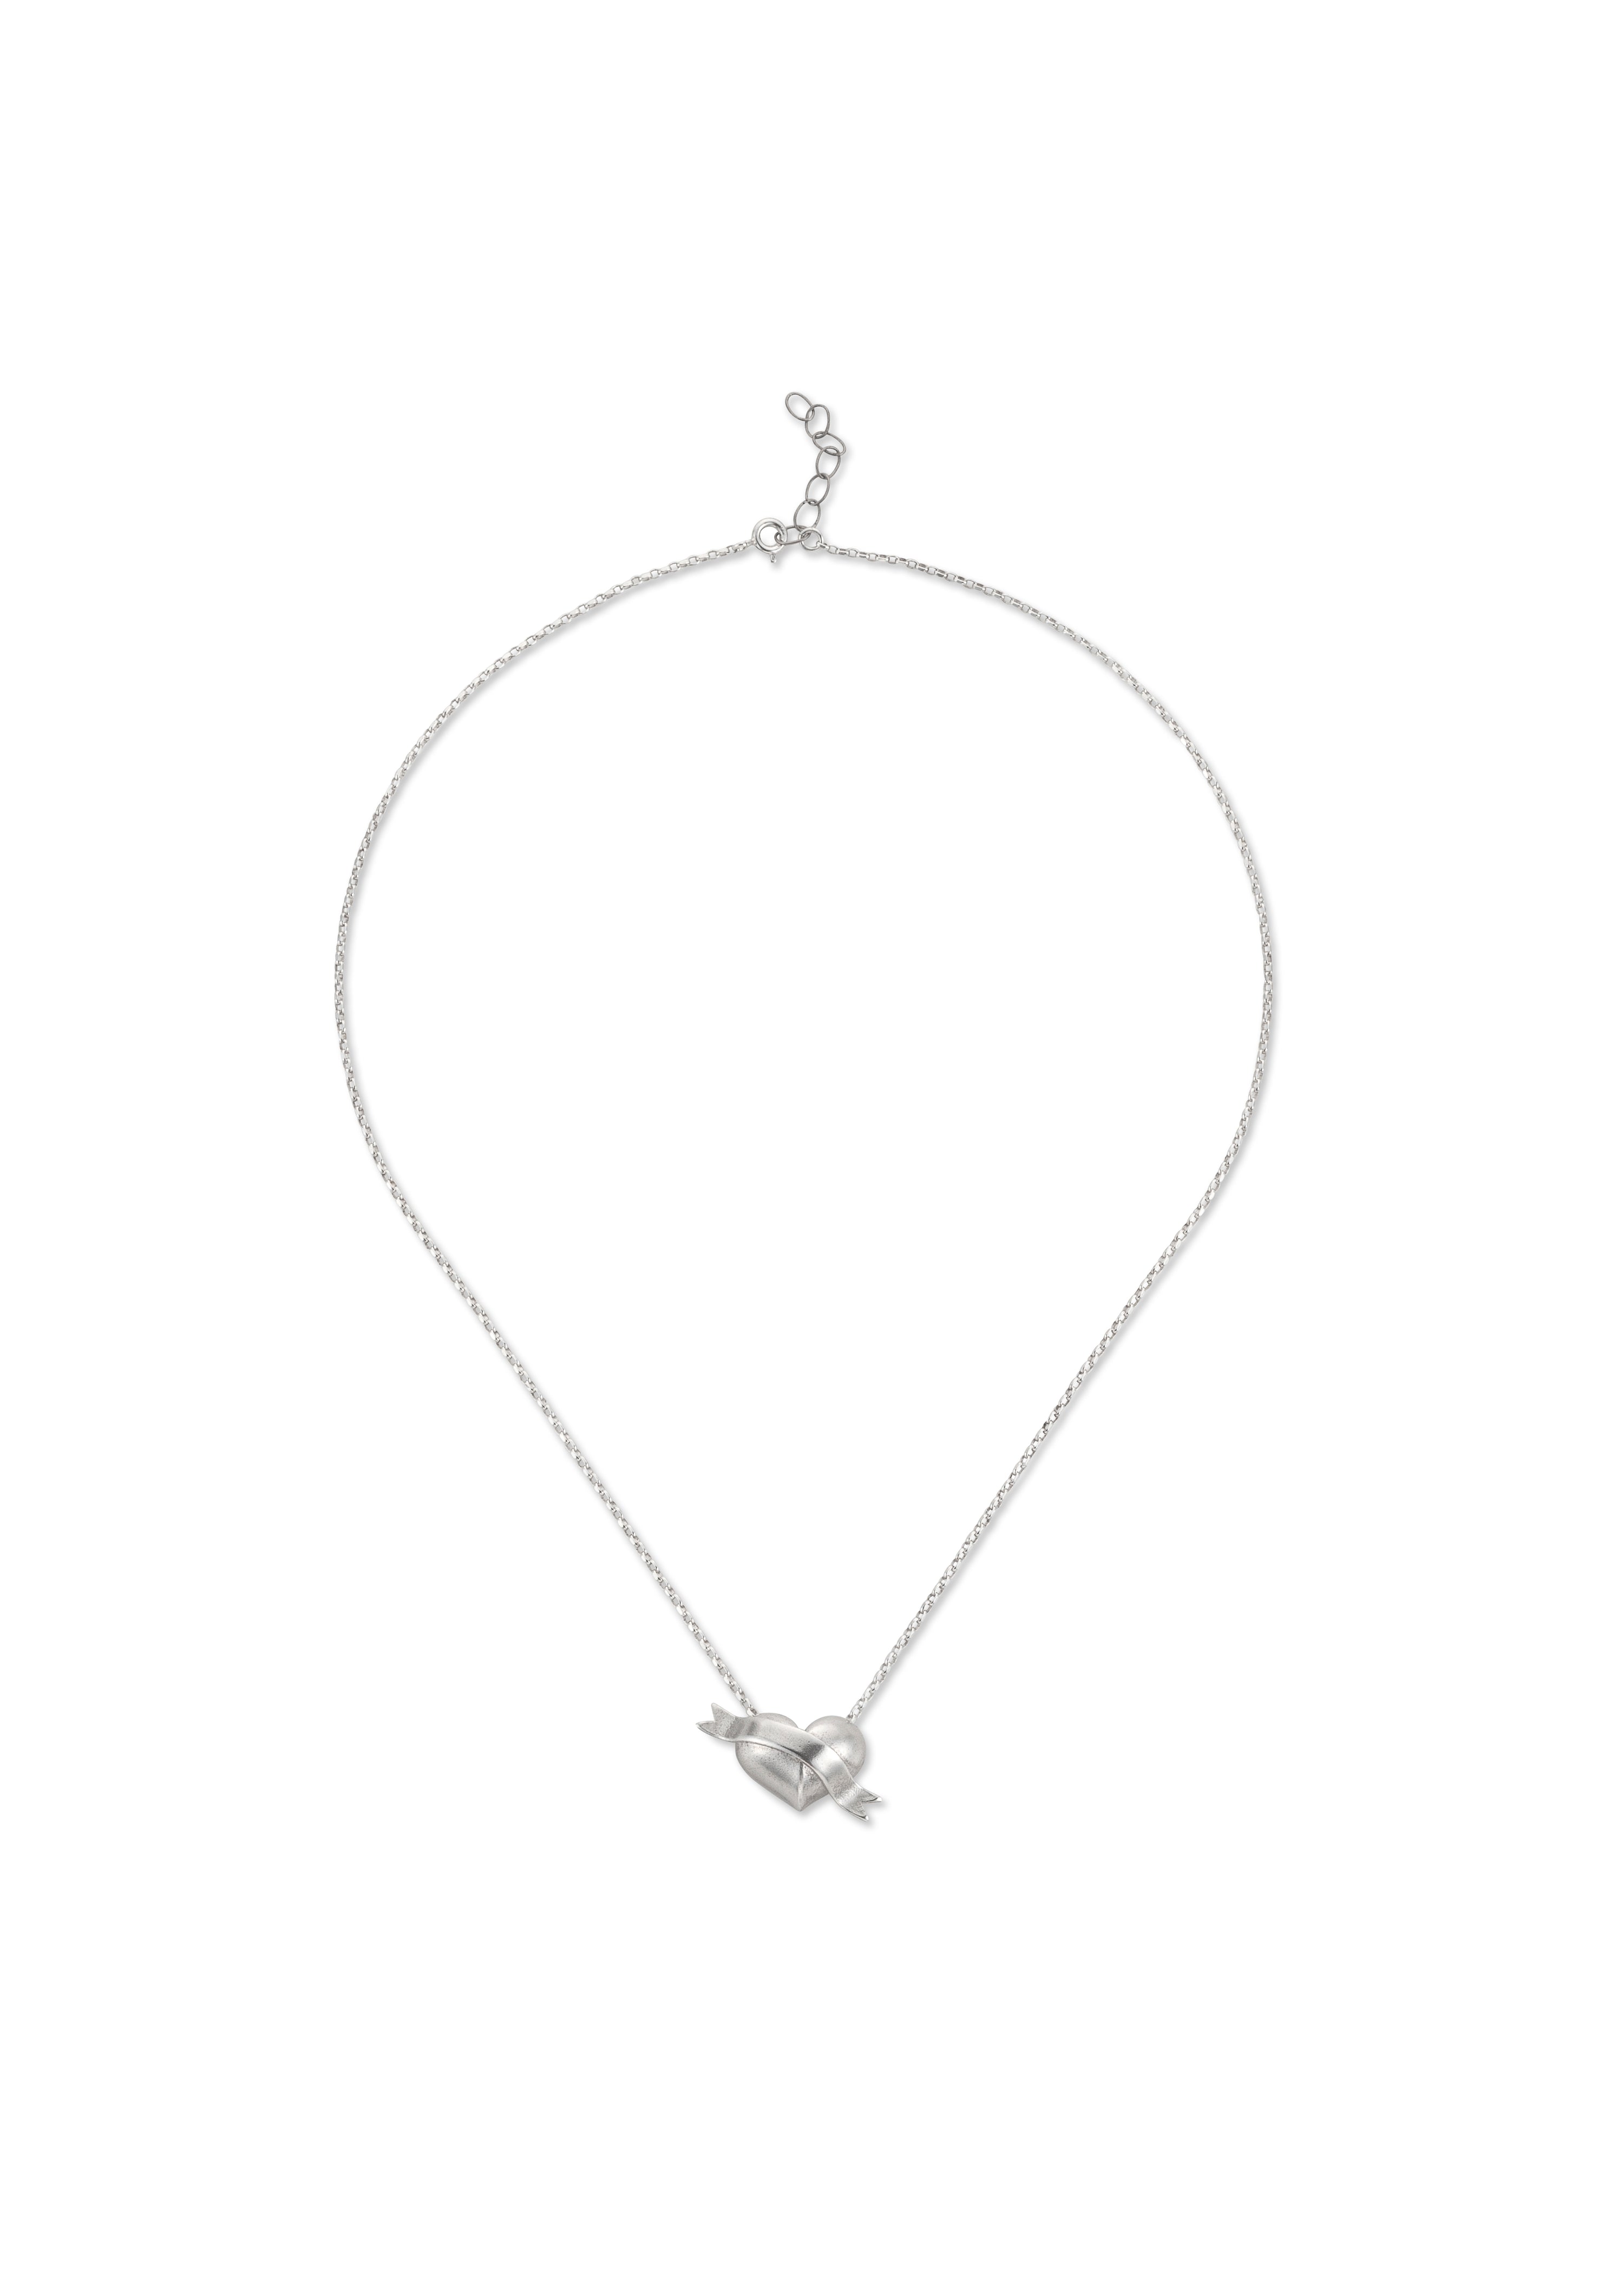 SILVER HEART AND BOW NECKLACE